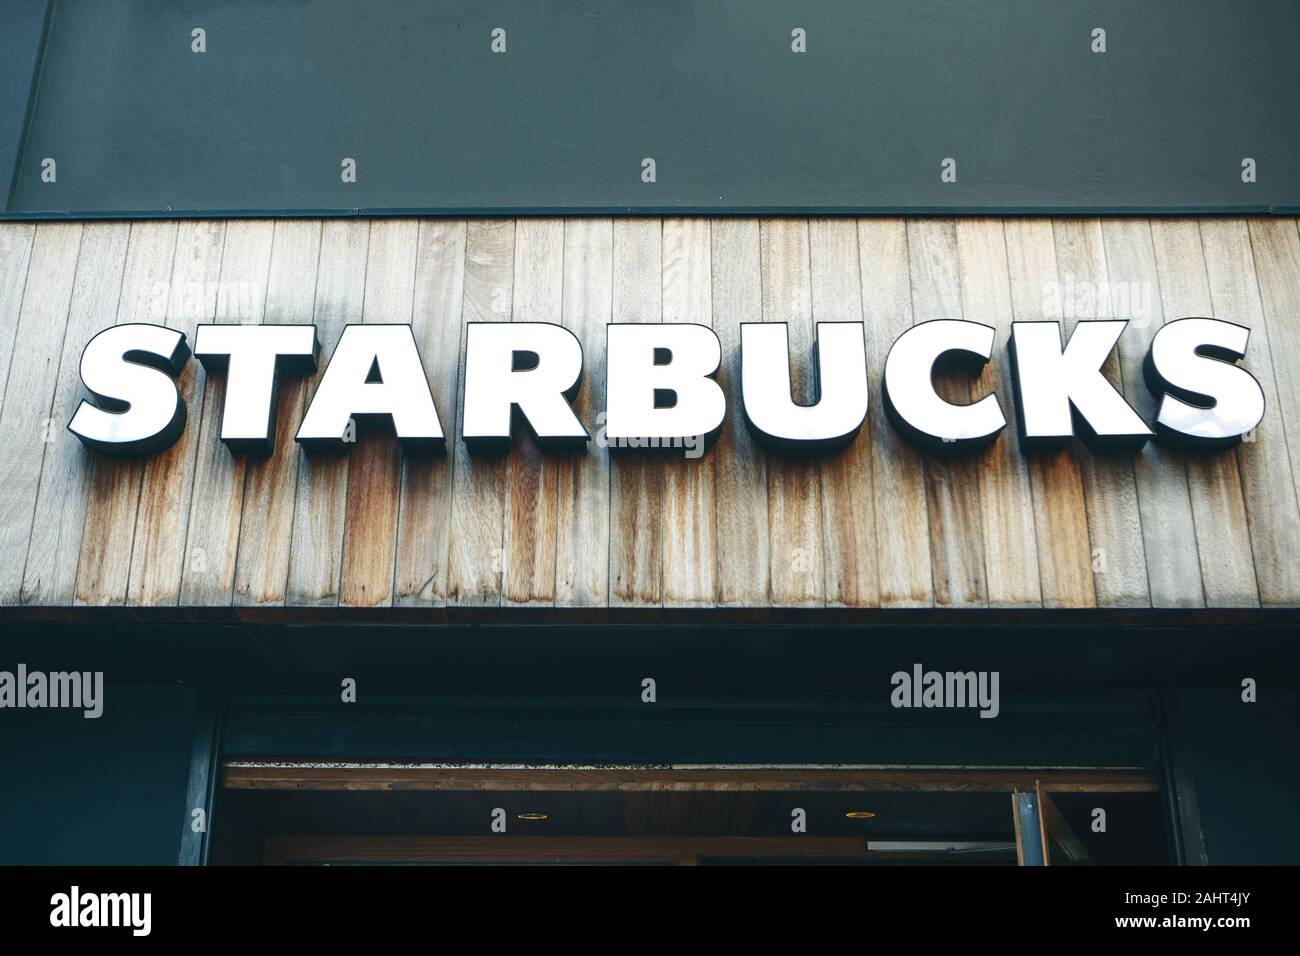 Turkey, Istanbul, December 29, 2019 Starbucks coffee sign at the entrance Stock Photo